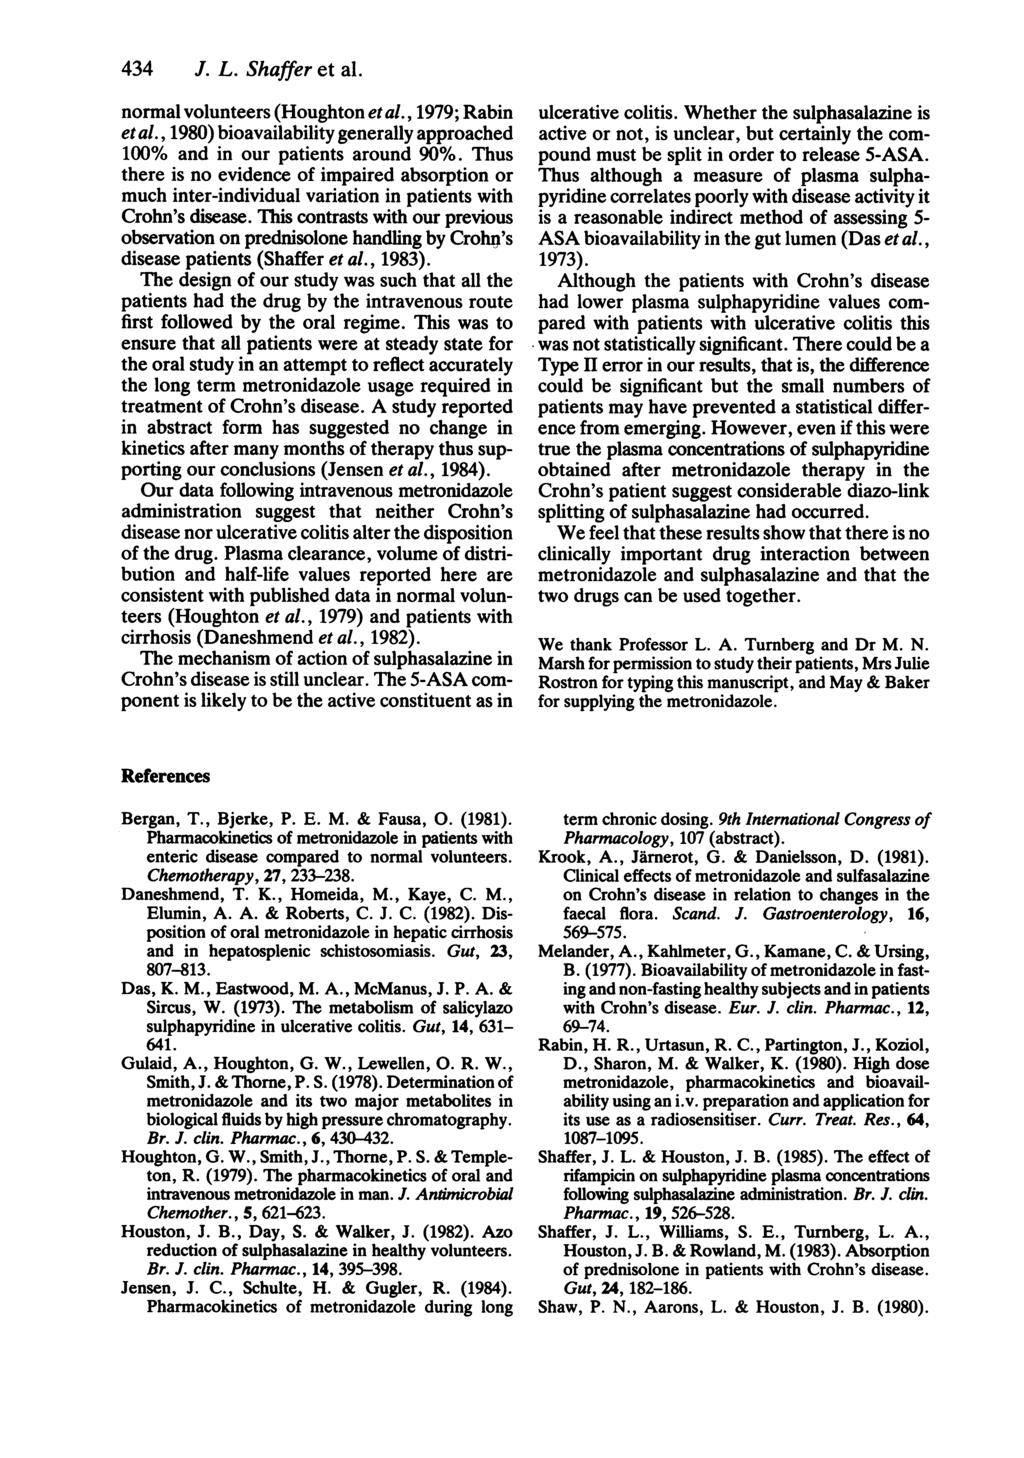 434 J. L. Shaffer et al. normal volunteers (Houghton etal., 1979; Rabin etal., 198) bioavailability generally approached 1% and in our patients around 9%.